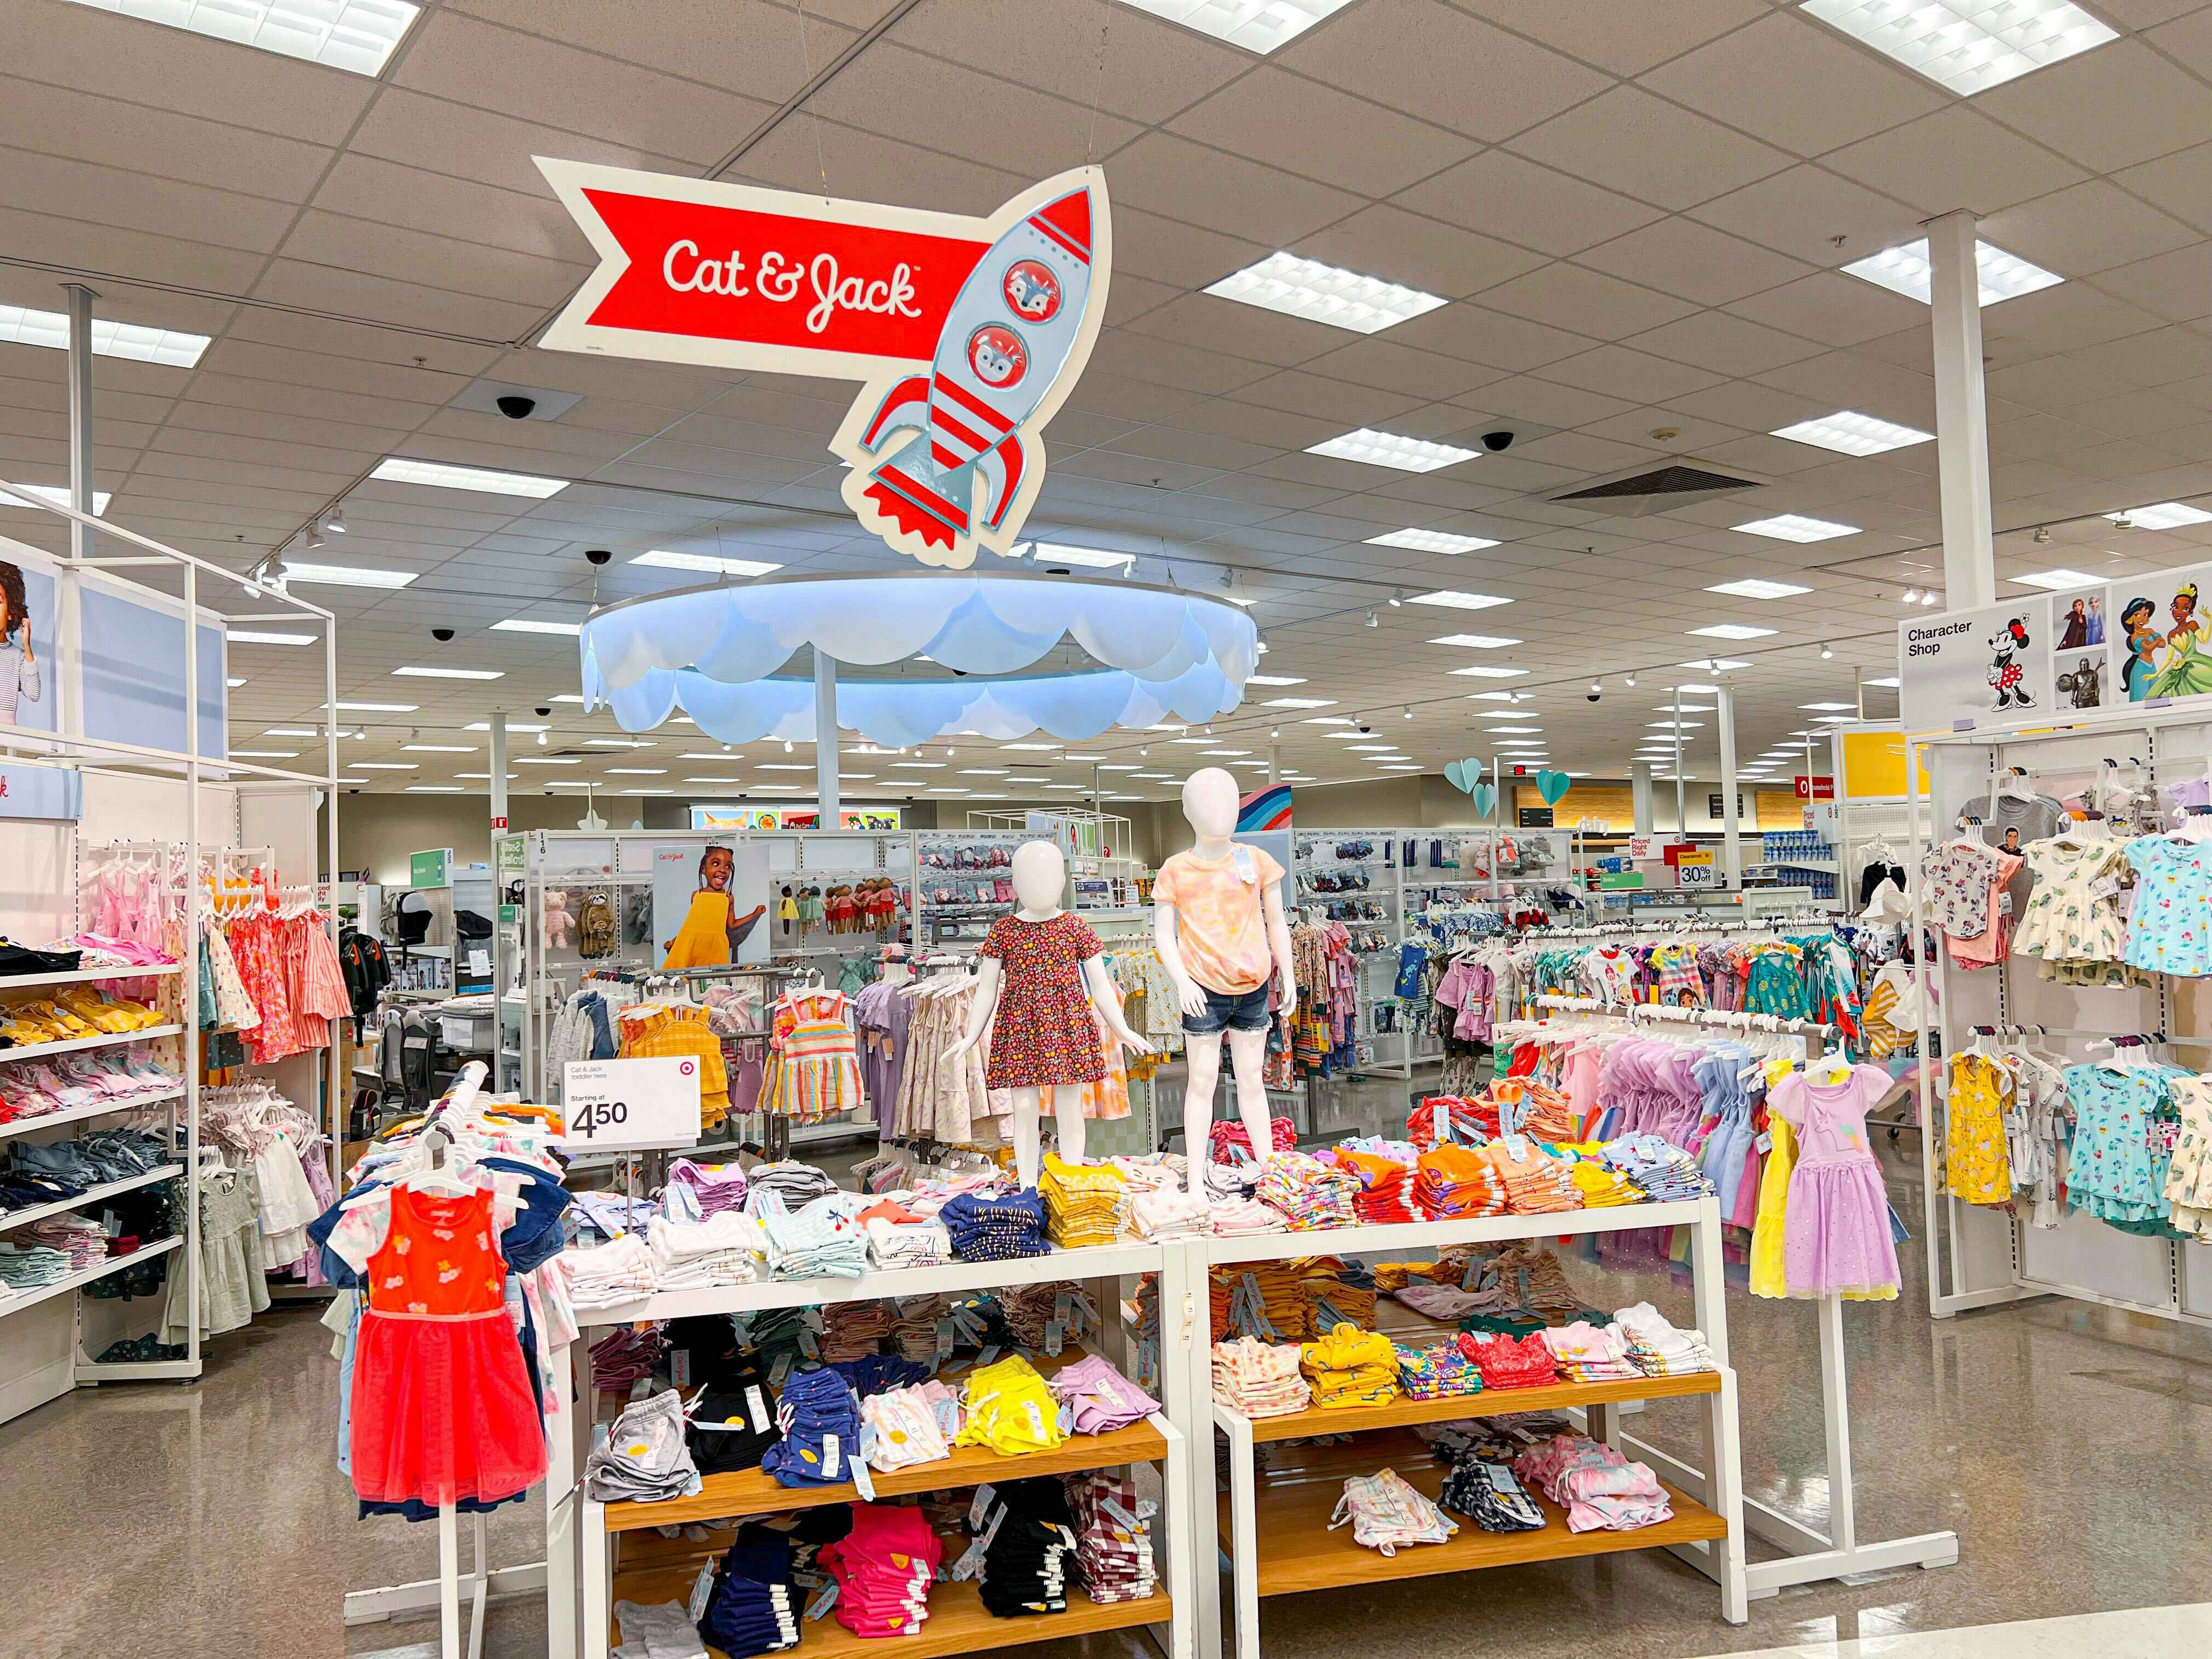 the cat and jack toddler apparel section at target